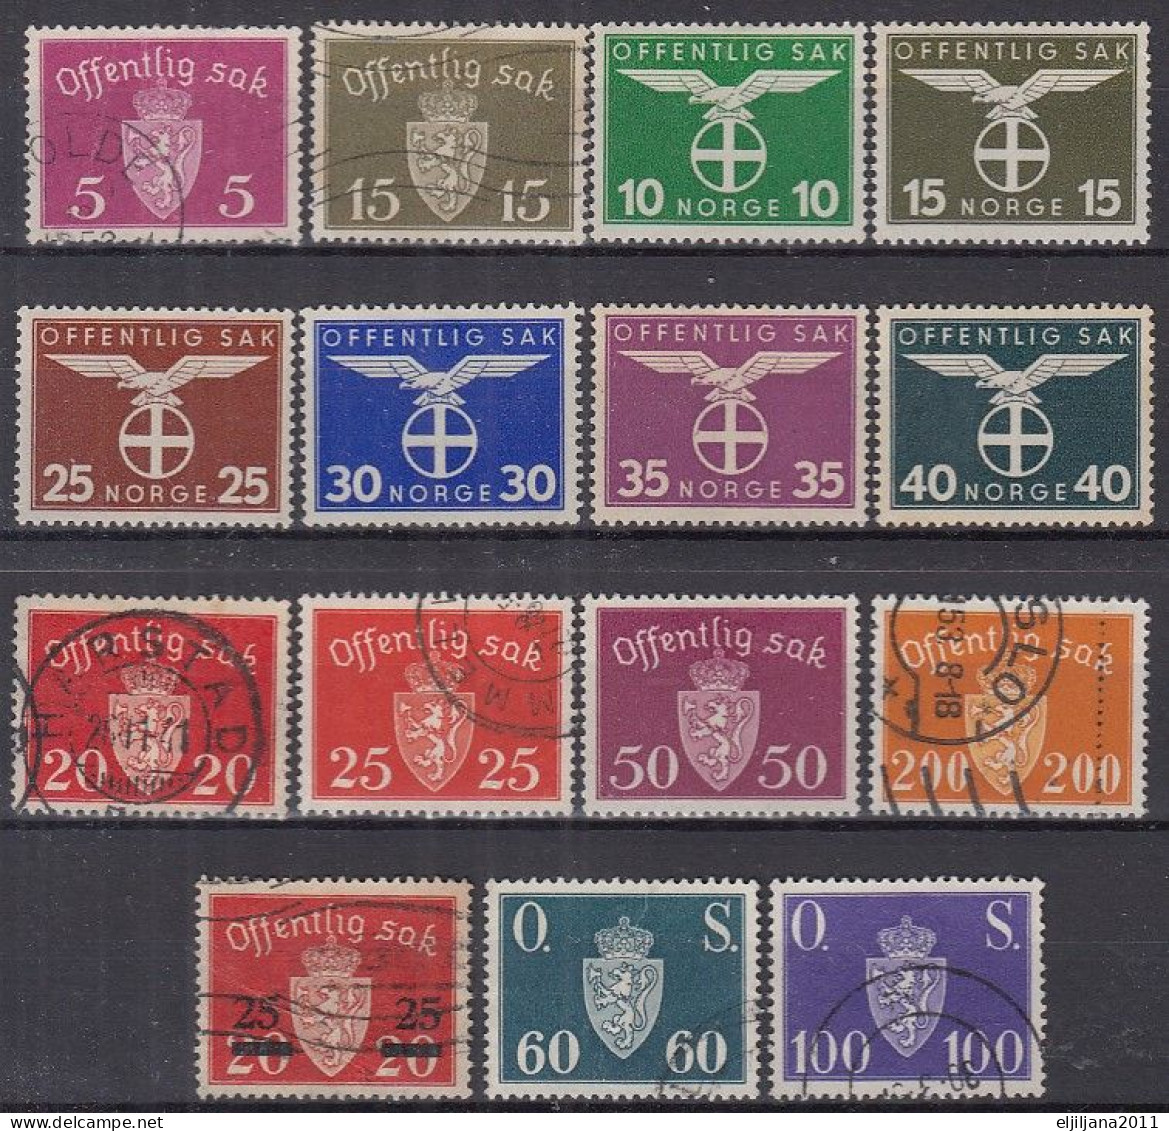 Action !! SALE !! 50 % OFF !! ⁕ Norway / NORGE 1937 - 1952 ⁕ Official Stamps ⁕ 15v MH & Used - Servizio